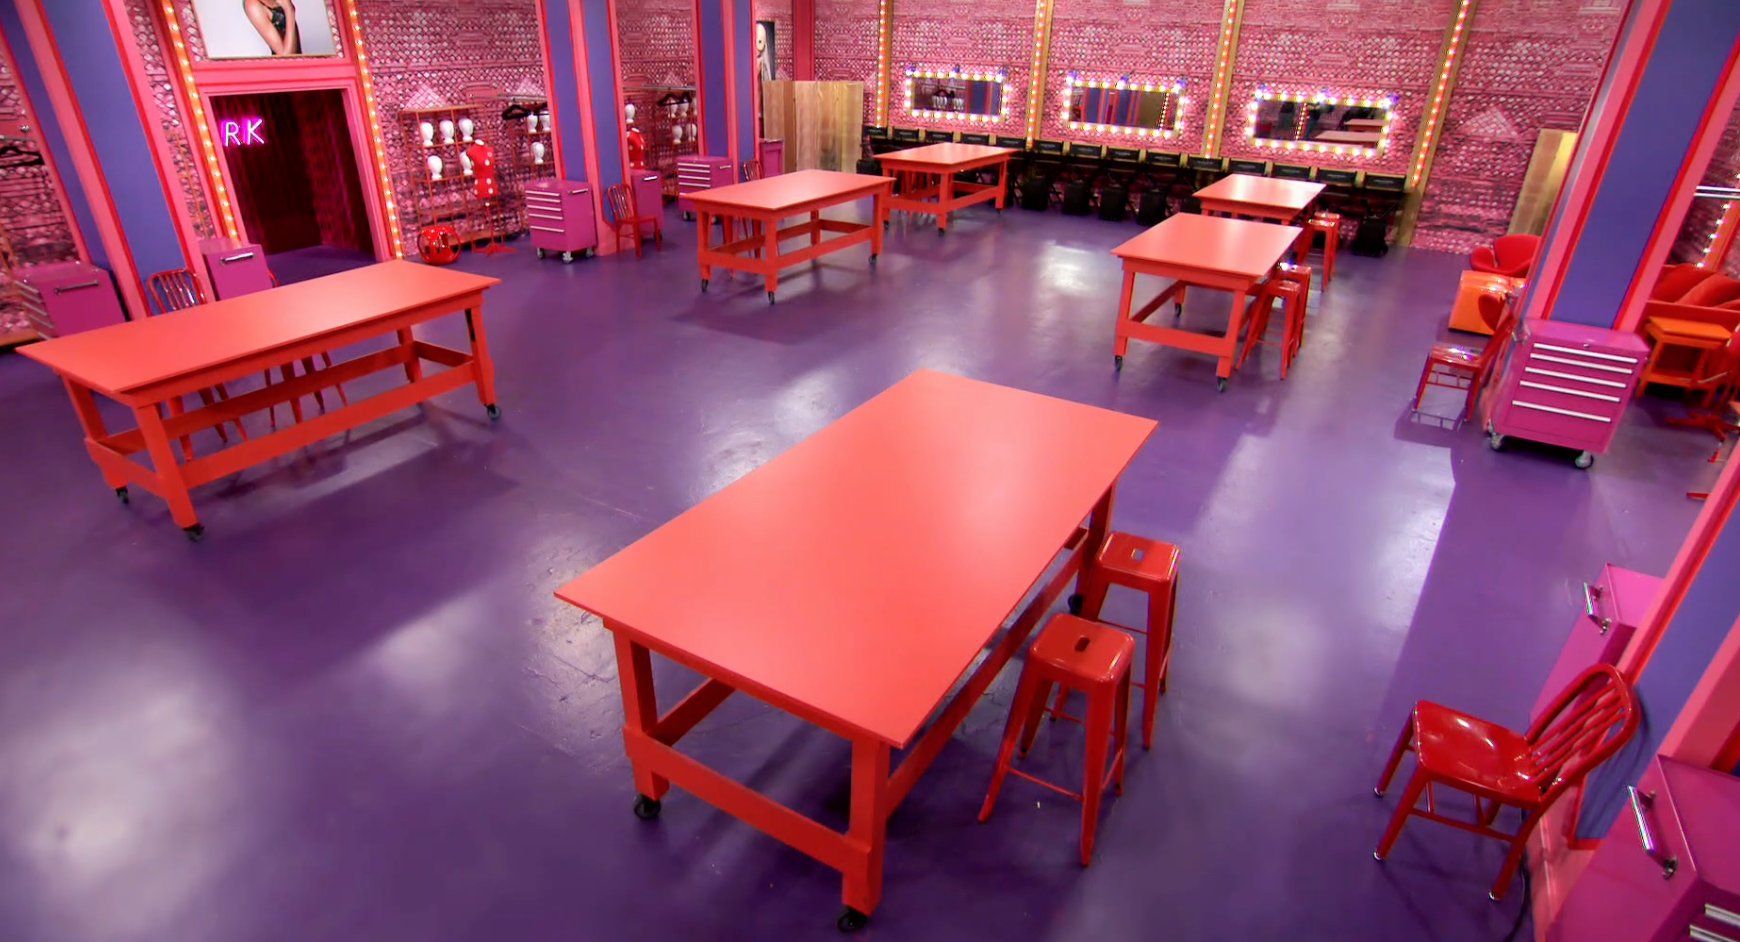 Ru Pauls Drag Race 2 - Show Set with tables and chairs